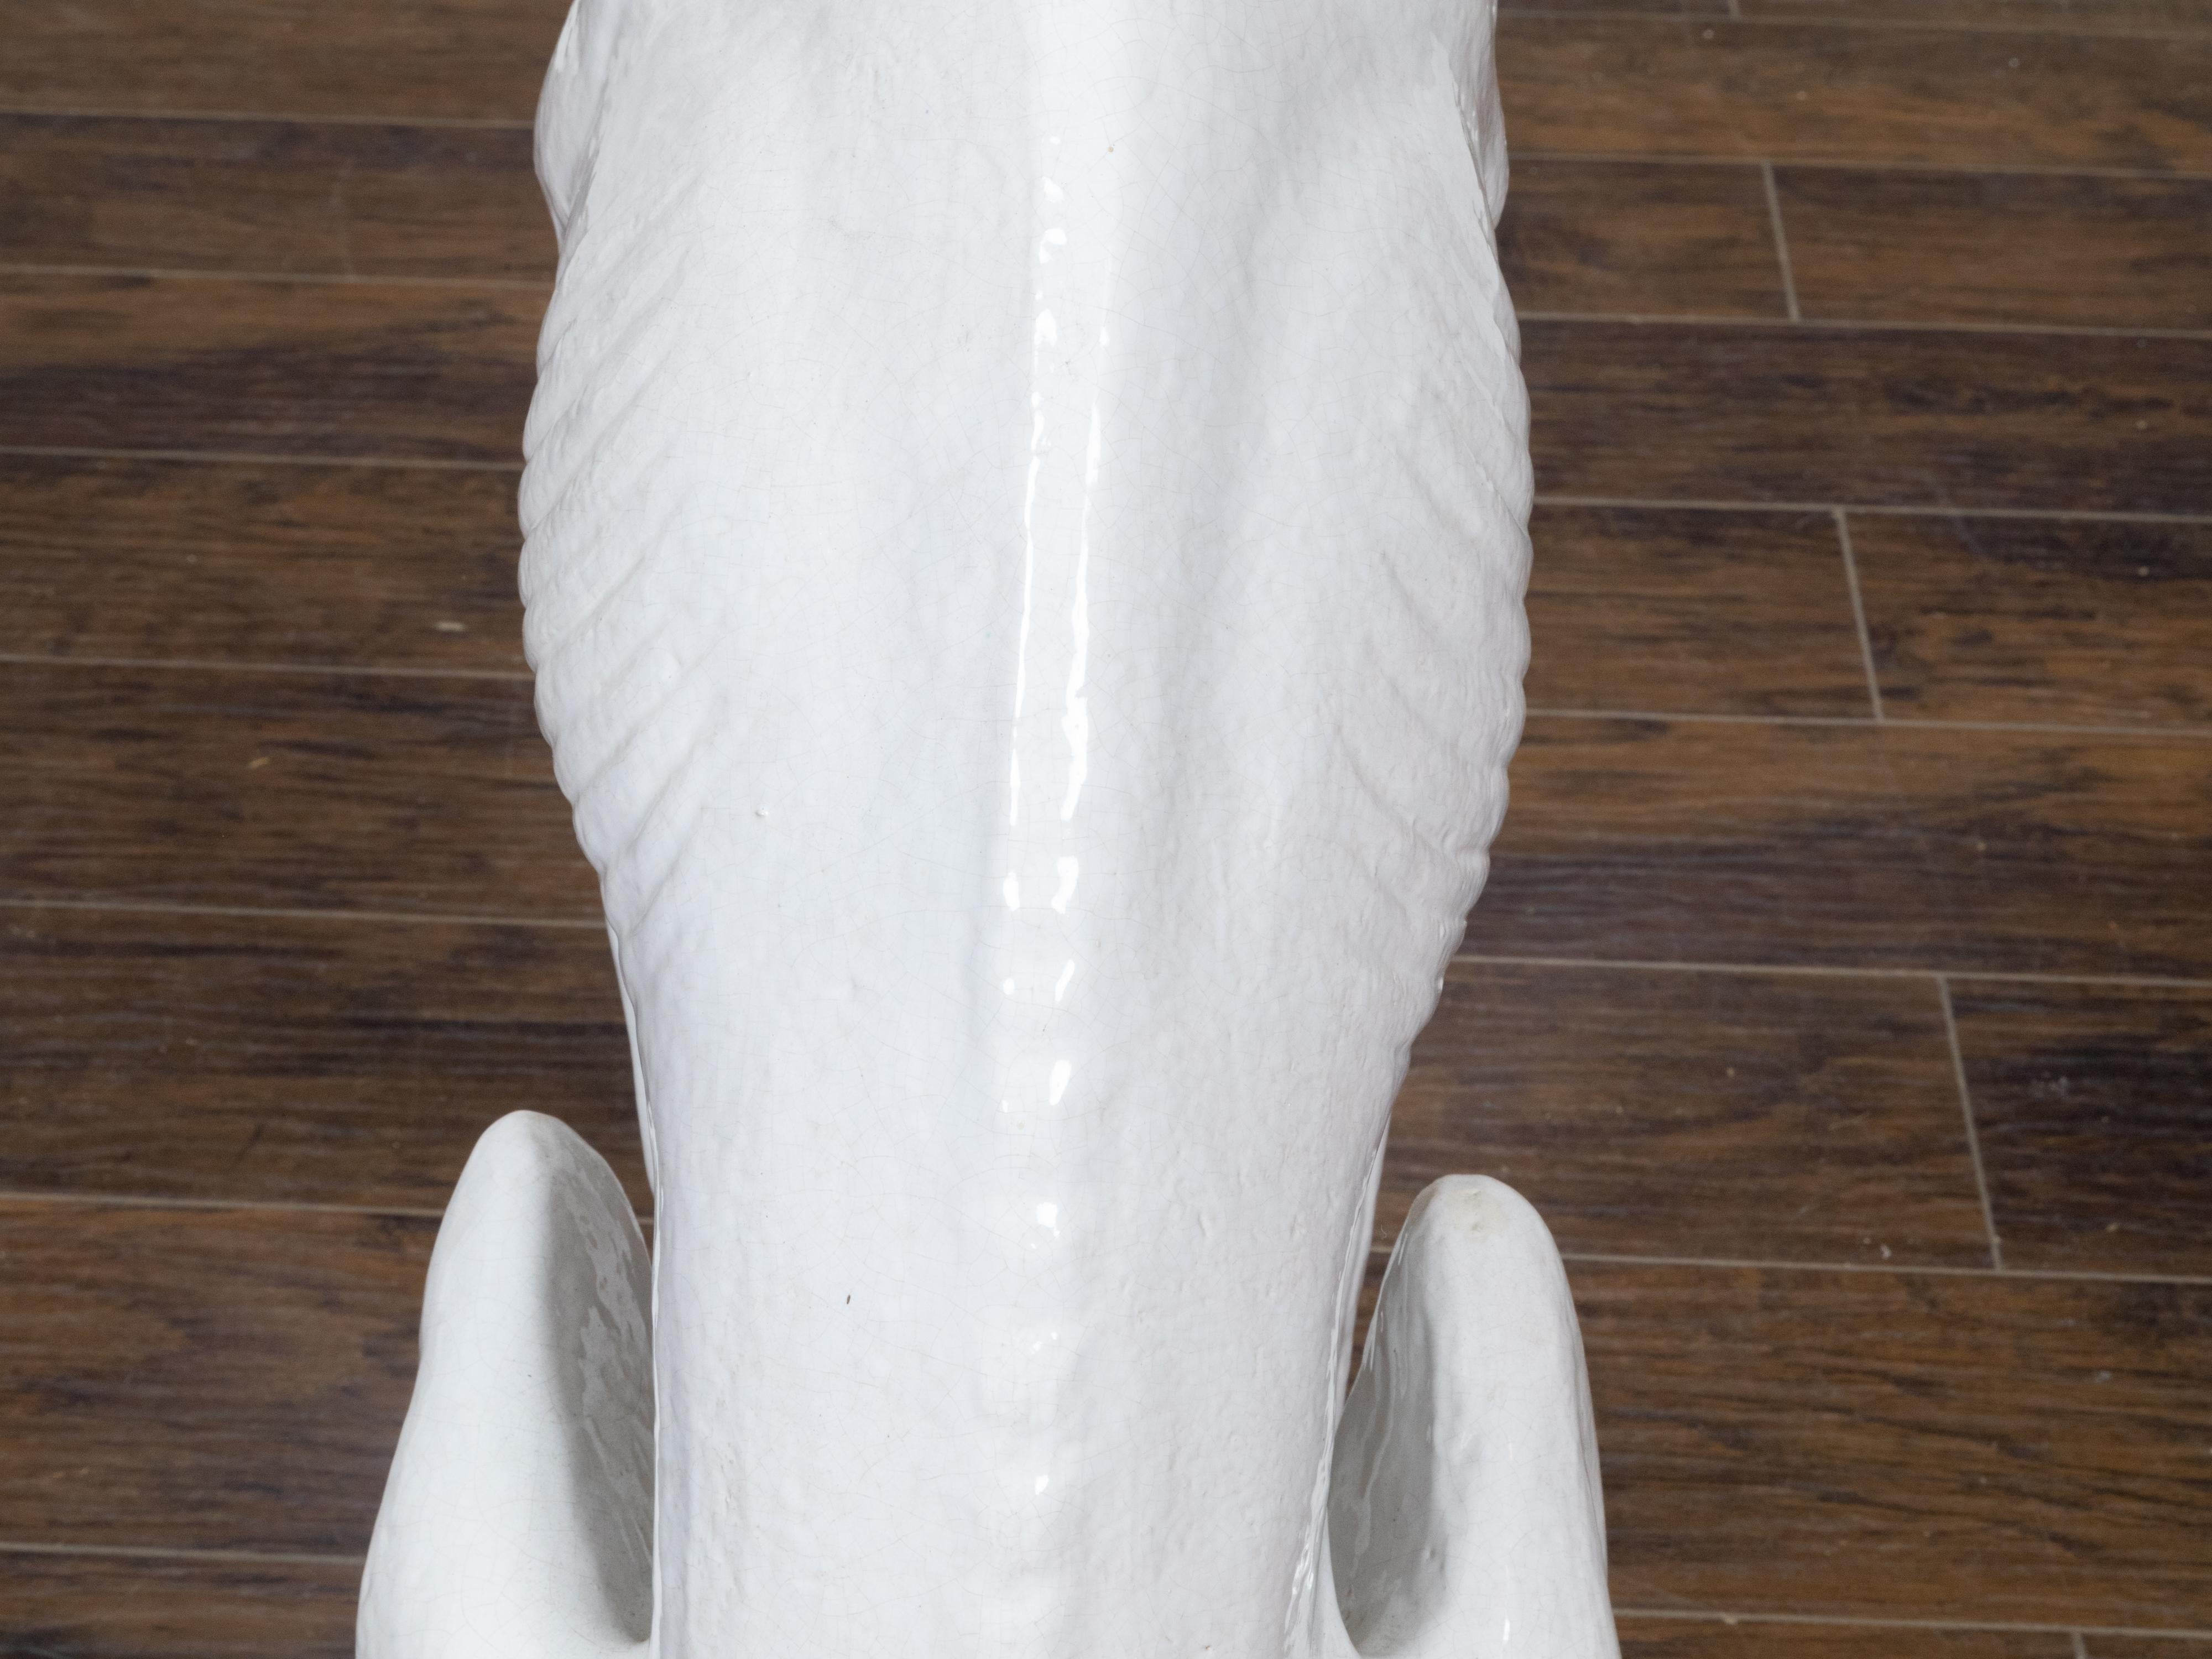 Midcentury Italian White Porcelain Sculpture of a Calm, Sitting Greyhound For Sale 4